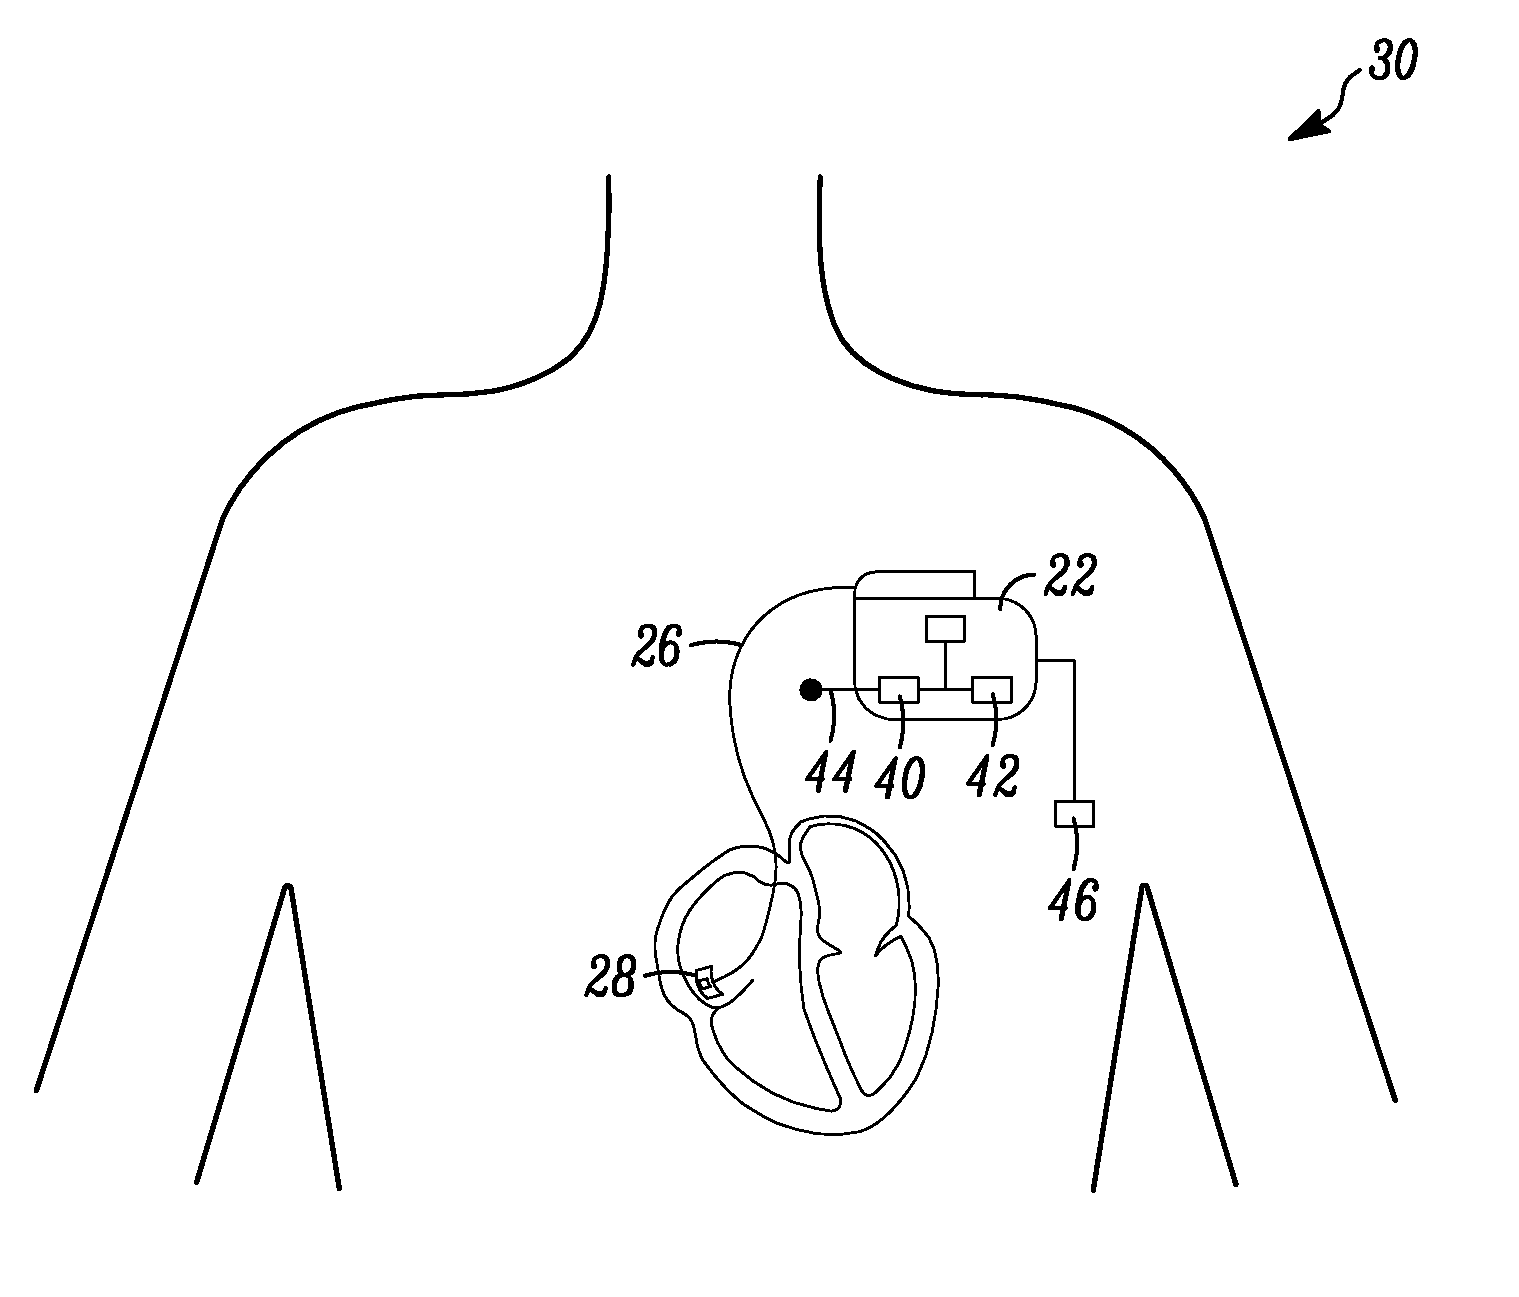 Glycemic control monitoring using implantable medical device